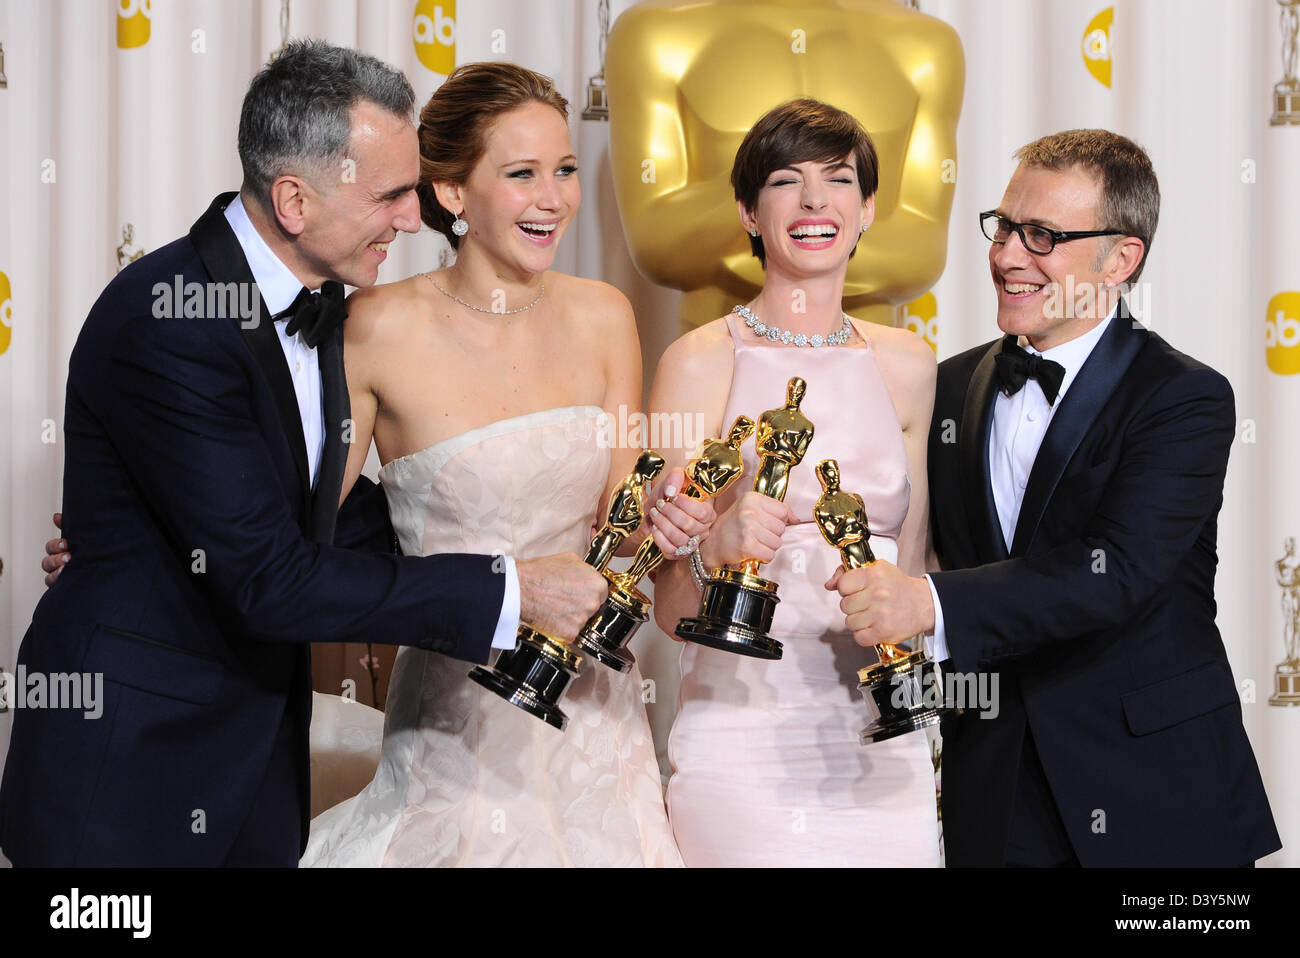 Los Angeles, USA. 24th February 2013. Daniel Day-Lewis, Jennifer Lawrence, Anne Hathaway and Christoph Waltz  in the winners press room at the 85th Annual Academy Awards Oscars, Los Angeles, America - 24 Feb 2013.  Credit:  Sydney Alford / Alamy Live News Stock Photo